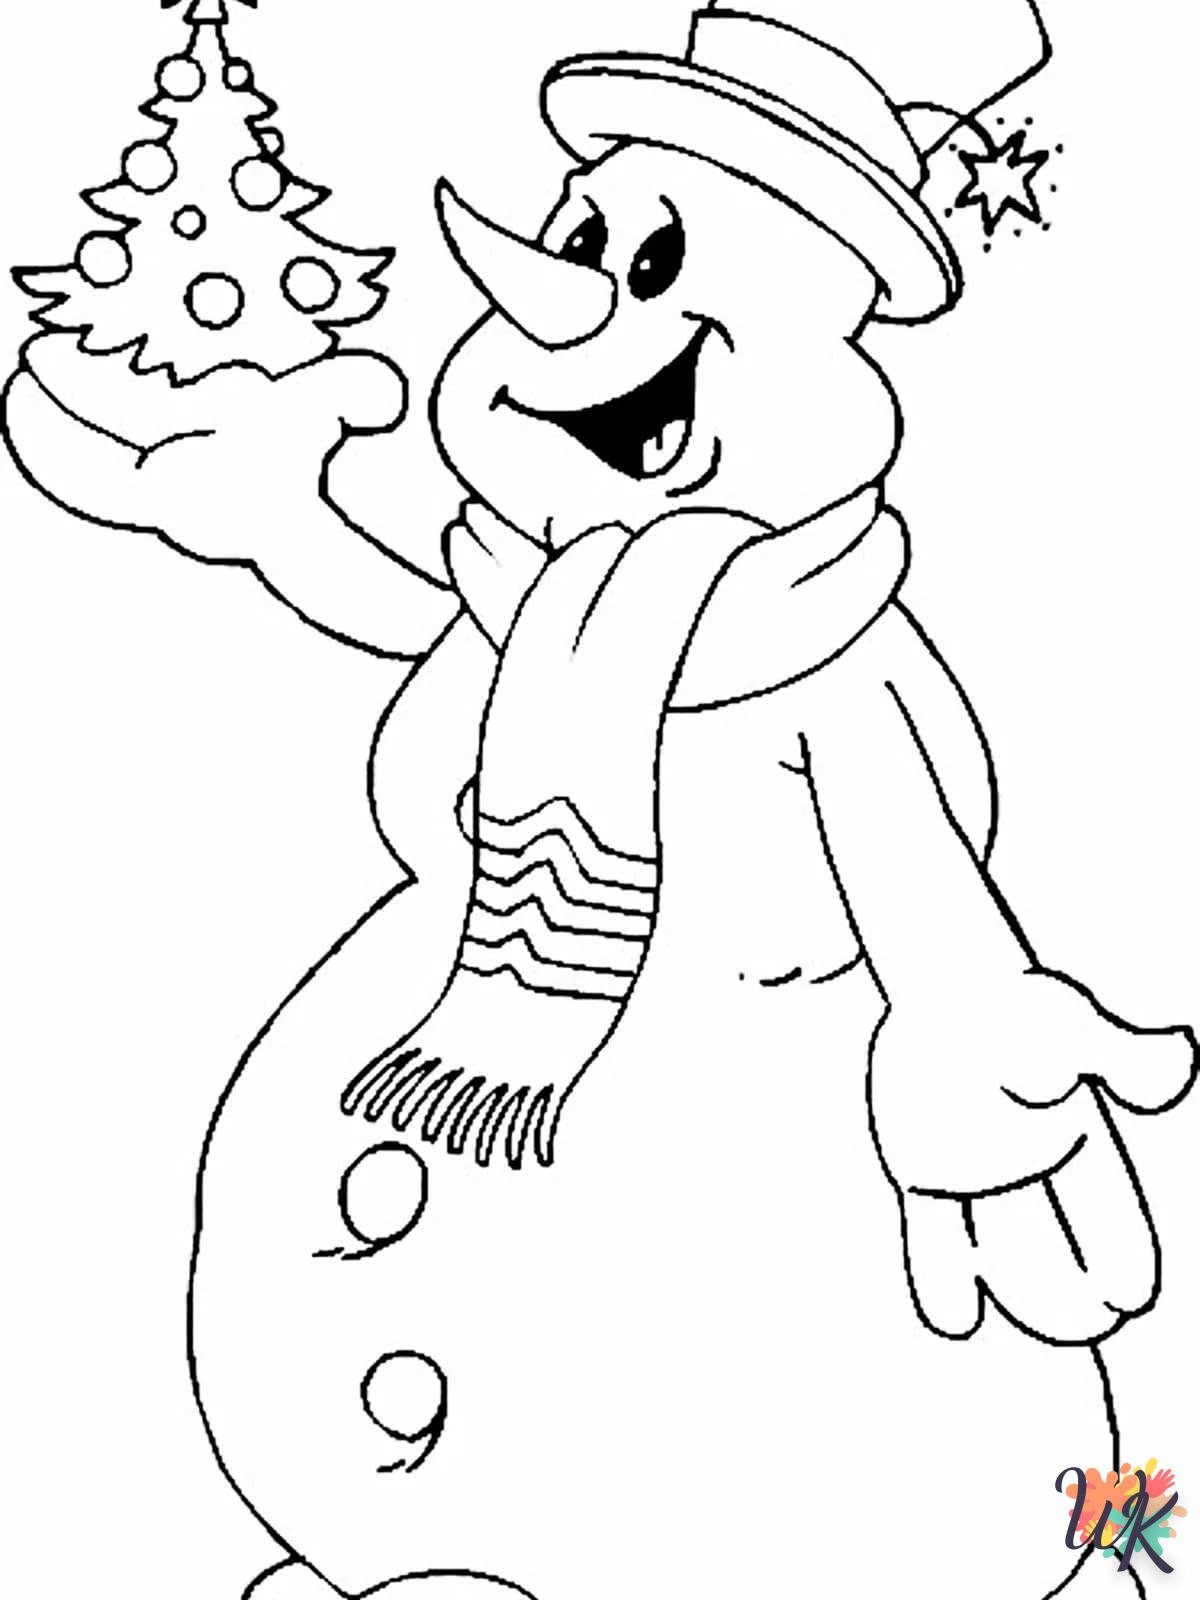 Snowman coloring online to print